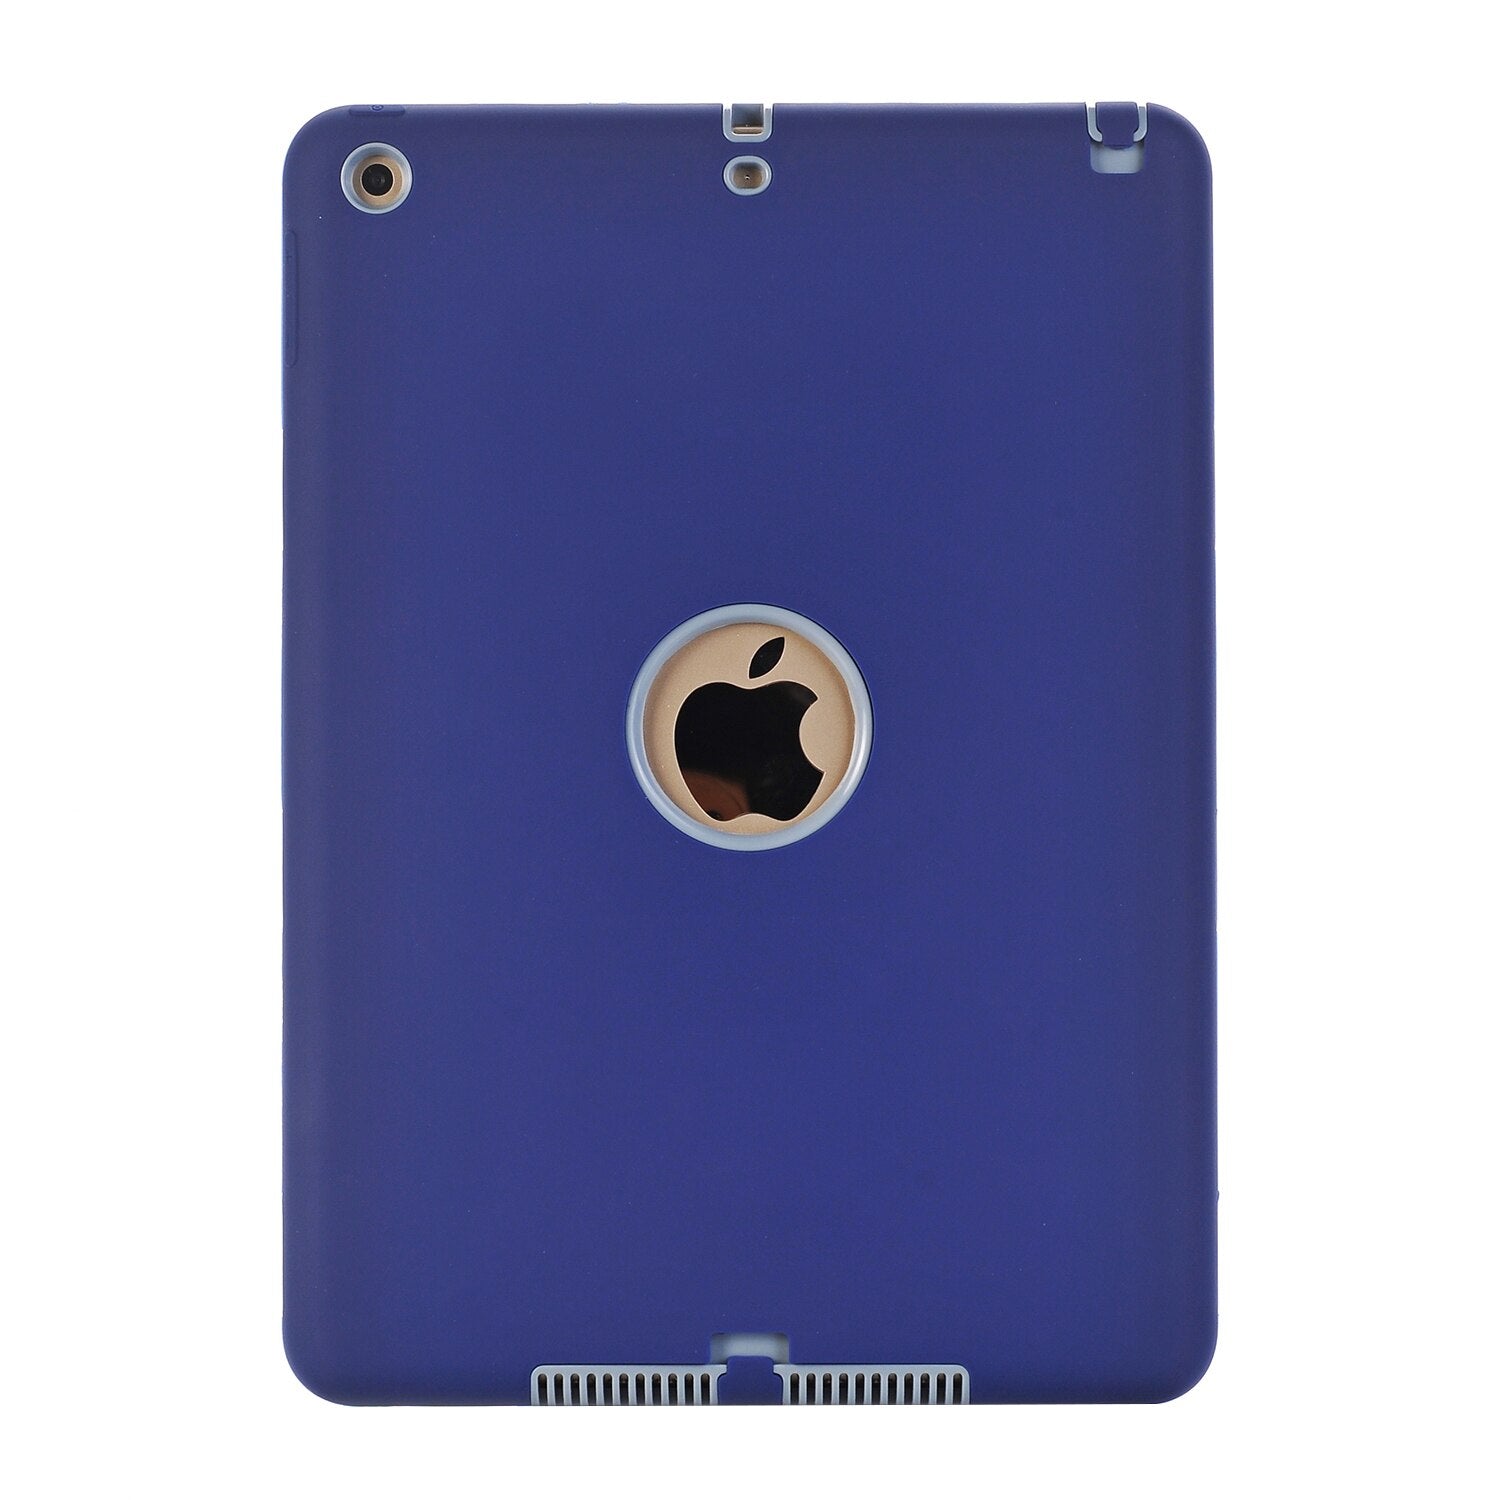 Cases For New iPad 9.7" 2017 (A1822/A1823),High-Impact Shockproof 3 Layers Soft Rubber Silicone+Hard PC Protective Cover Shell - 200001091 Blue Grey / United States Find Epic Store